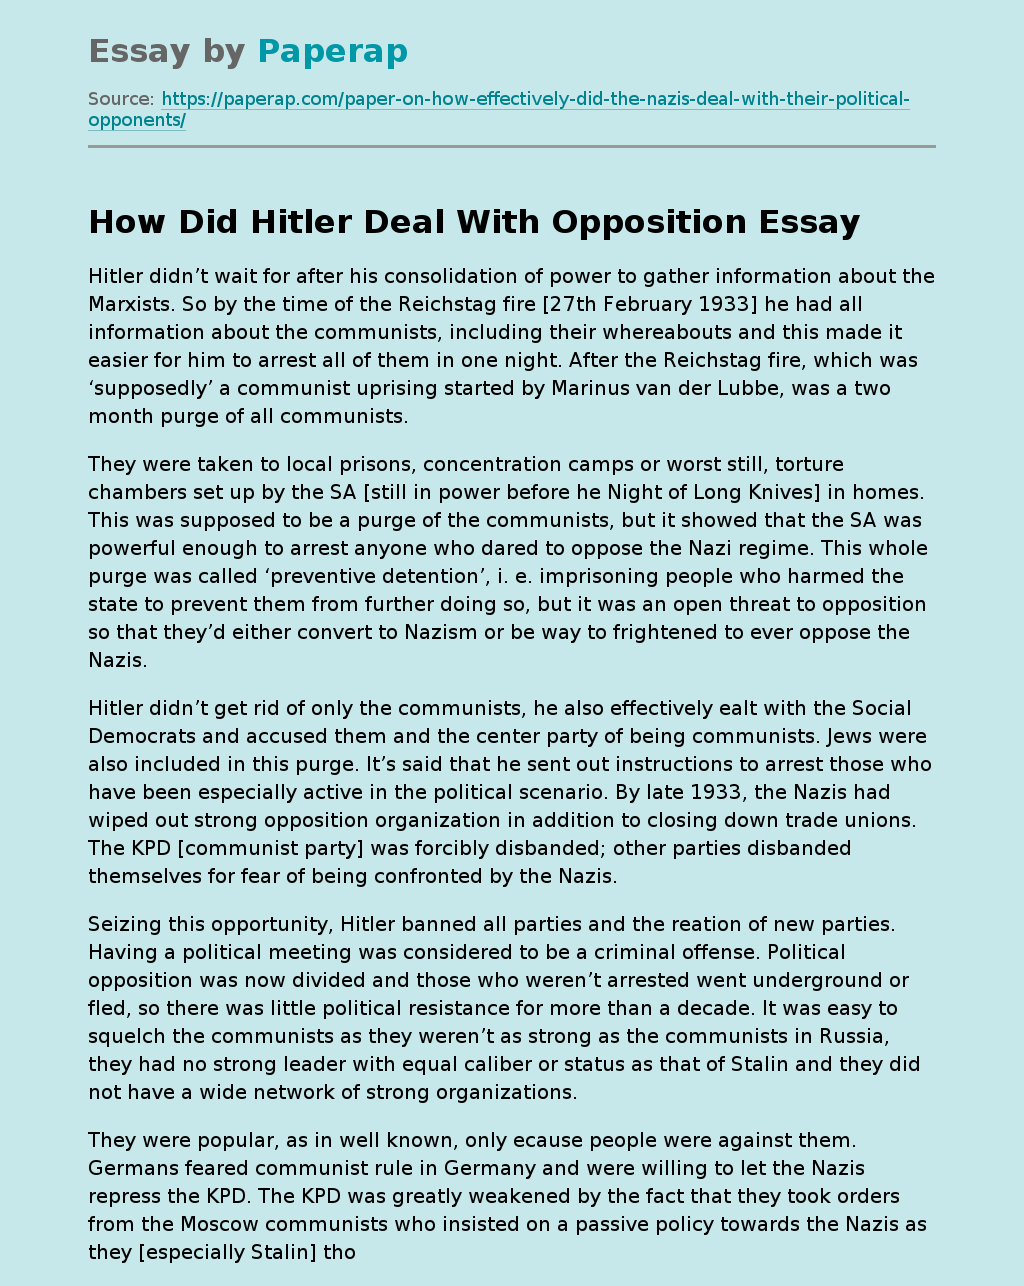 How Did Hitler Deal With Opposition